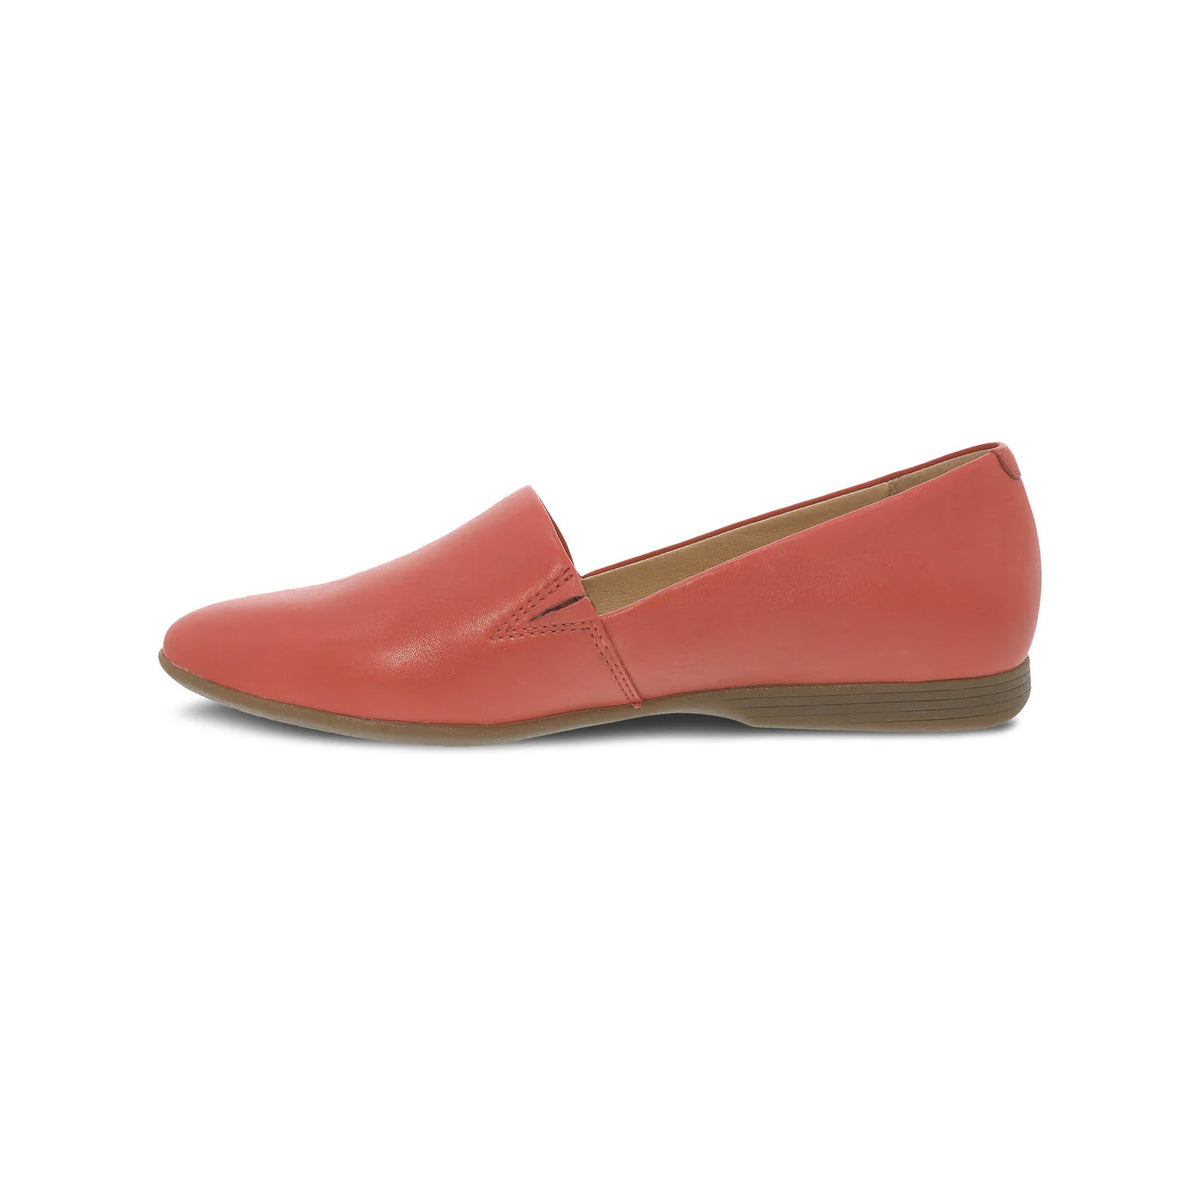 A red Dansko Larisa Poppy - Womens flat shoe with leather uppers, isolated on a white background.